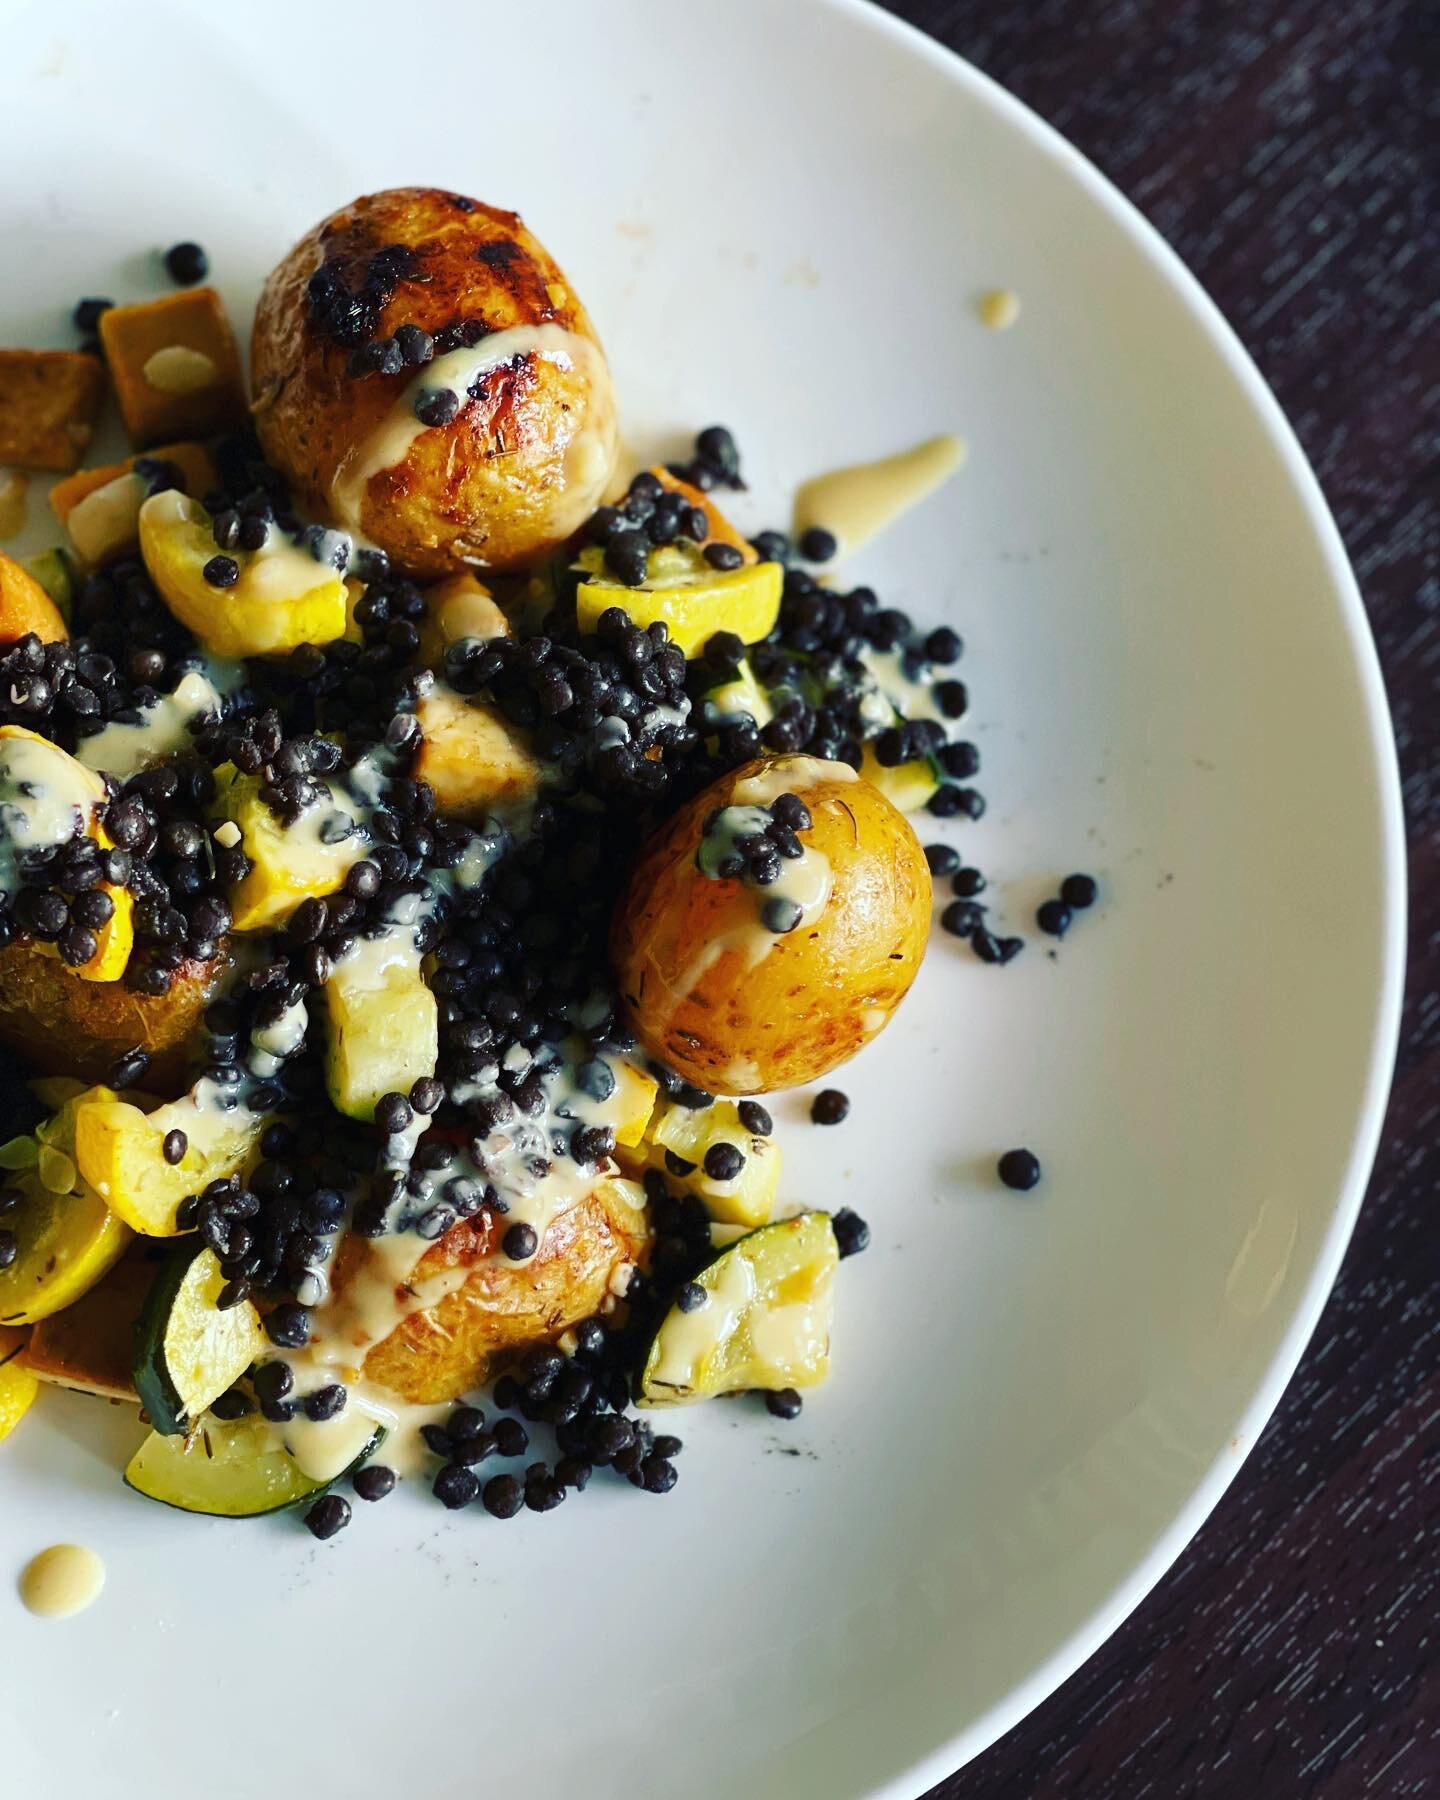 Easy Tuesday night dinner! And not only was it easy, it was really good! Roasted baby potatoes, black lentils, zucchini and squash drizzled with a Dijon dressing&hellip;. I added tofu, because why not 😊 

Dinner is done, kitchen is clean, now I&rsqu